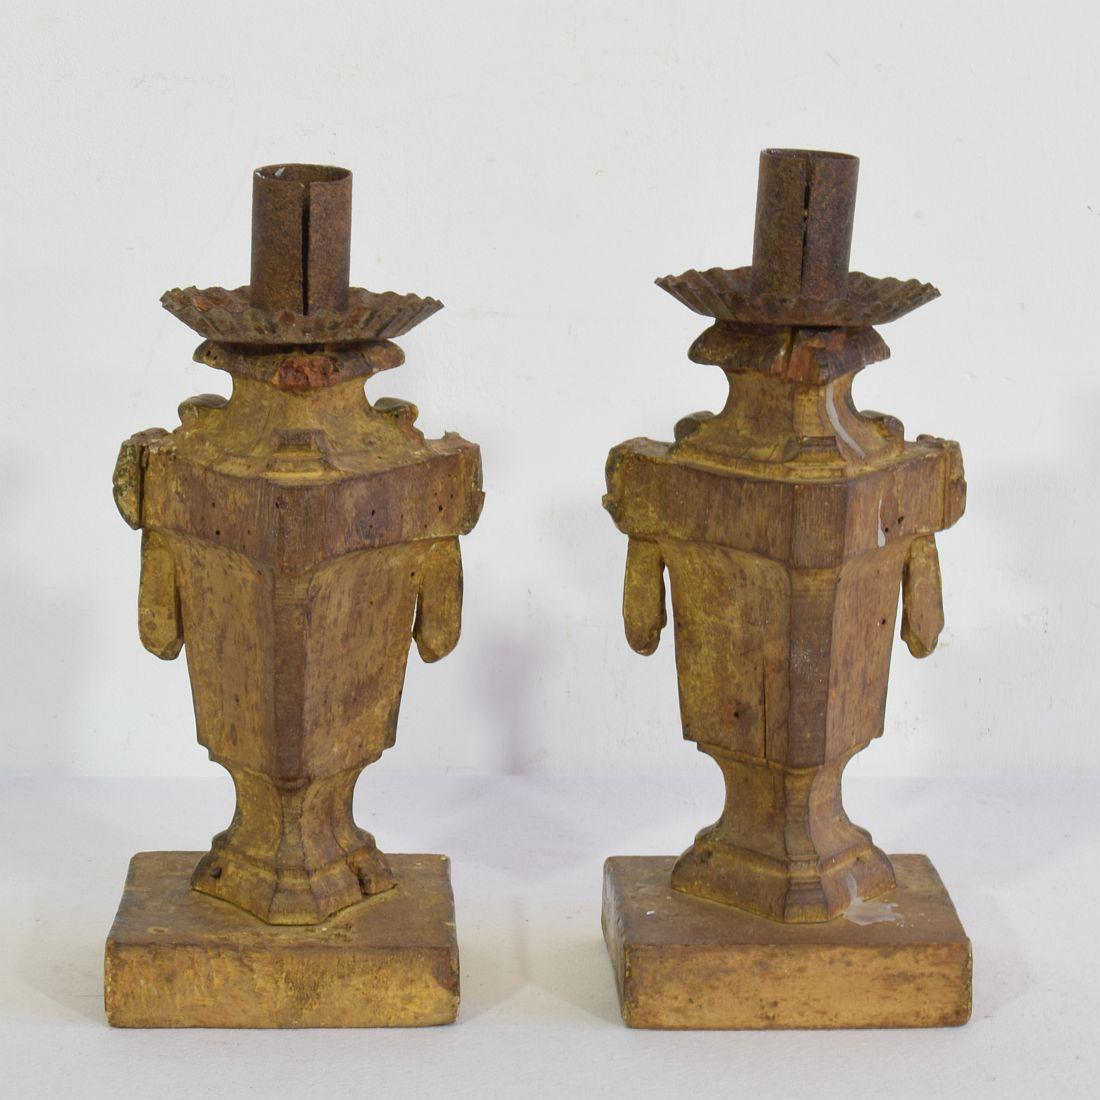 Pair of Small 18th Century Italian Neoclassical Candleholders / Candlesticks For Sale 2